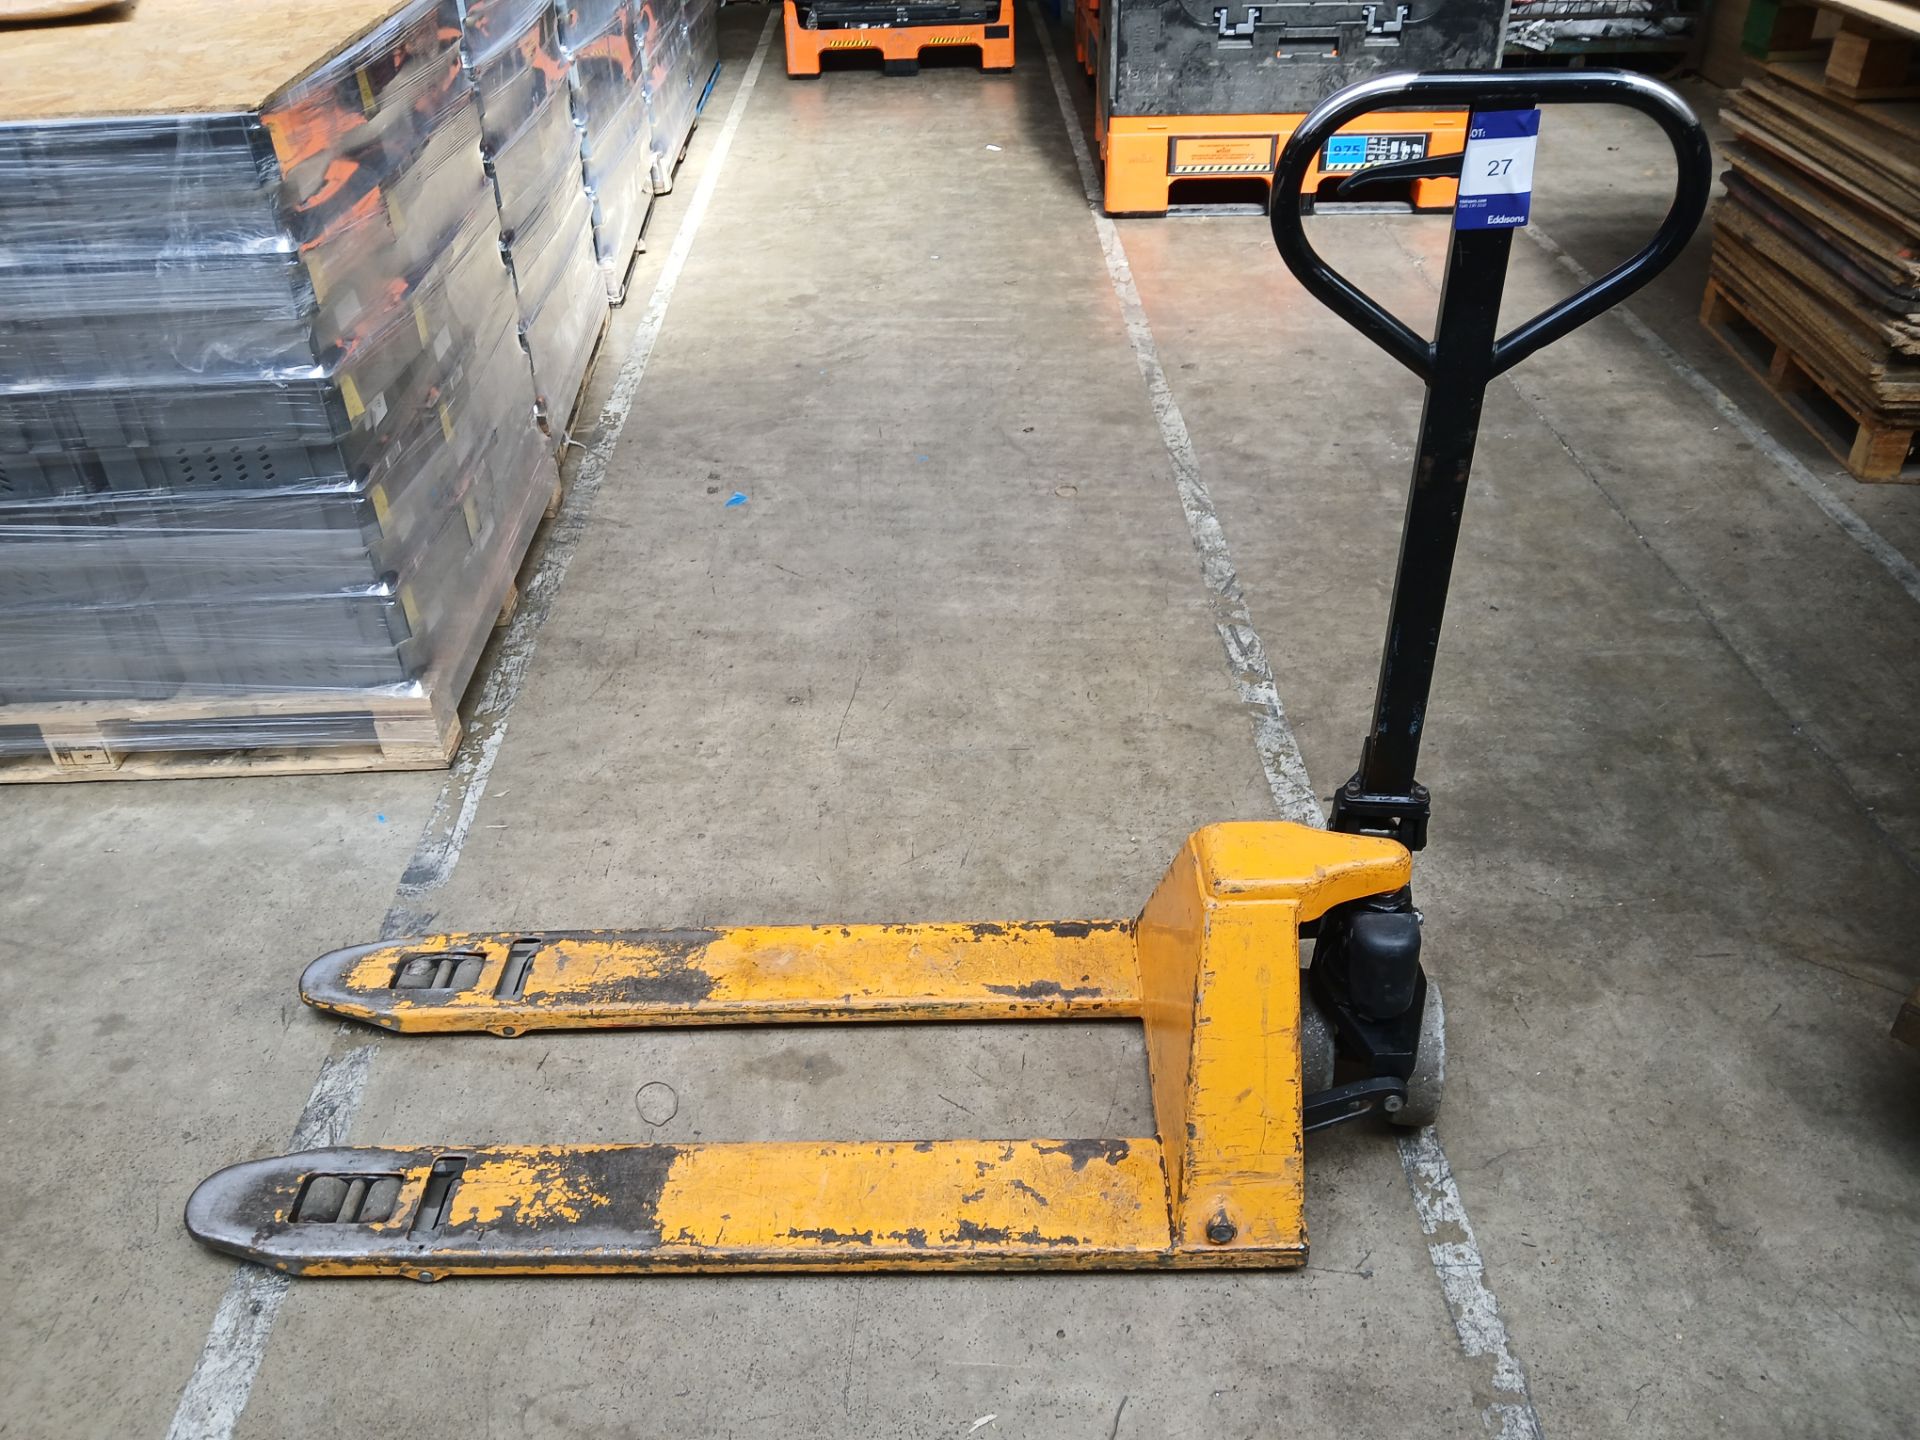 Unknown low Profile 2,000kg capacity pallet truck